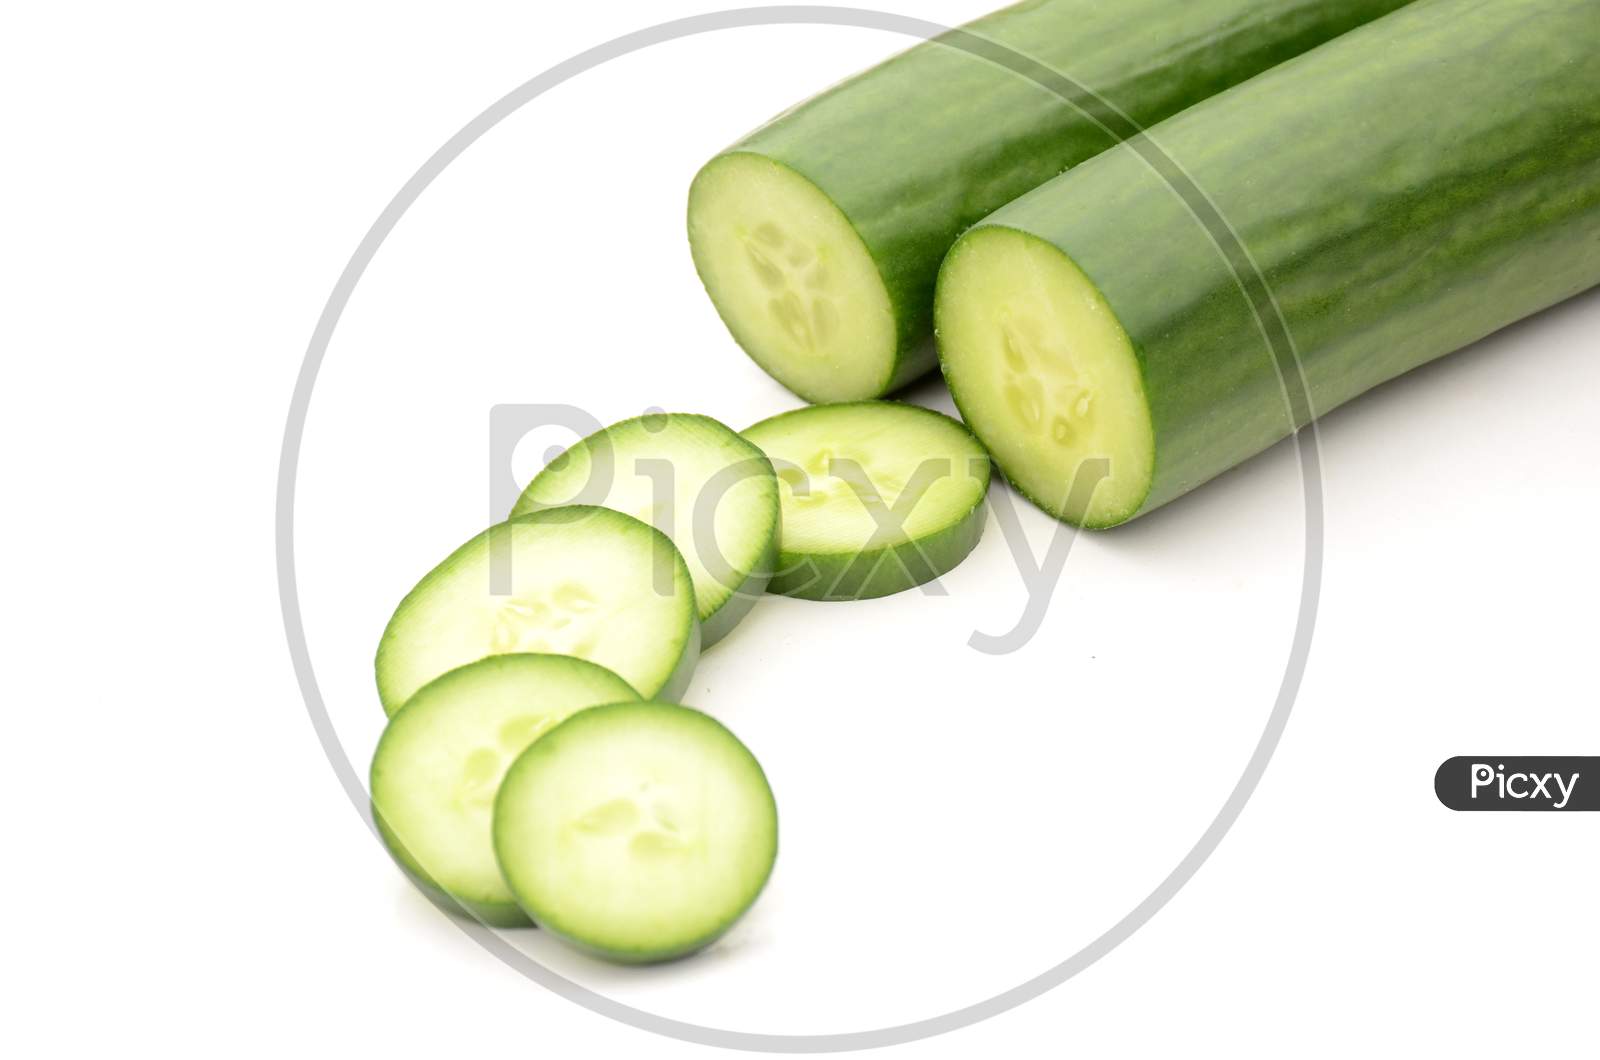 Closeup The Pair Of Sliced Green Ripe Cucumber Isolated On White Background.